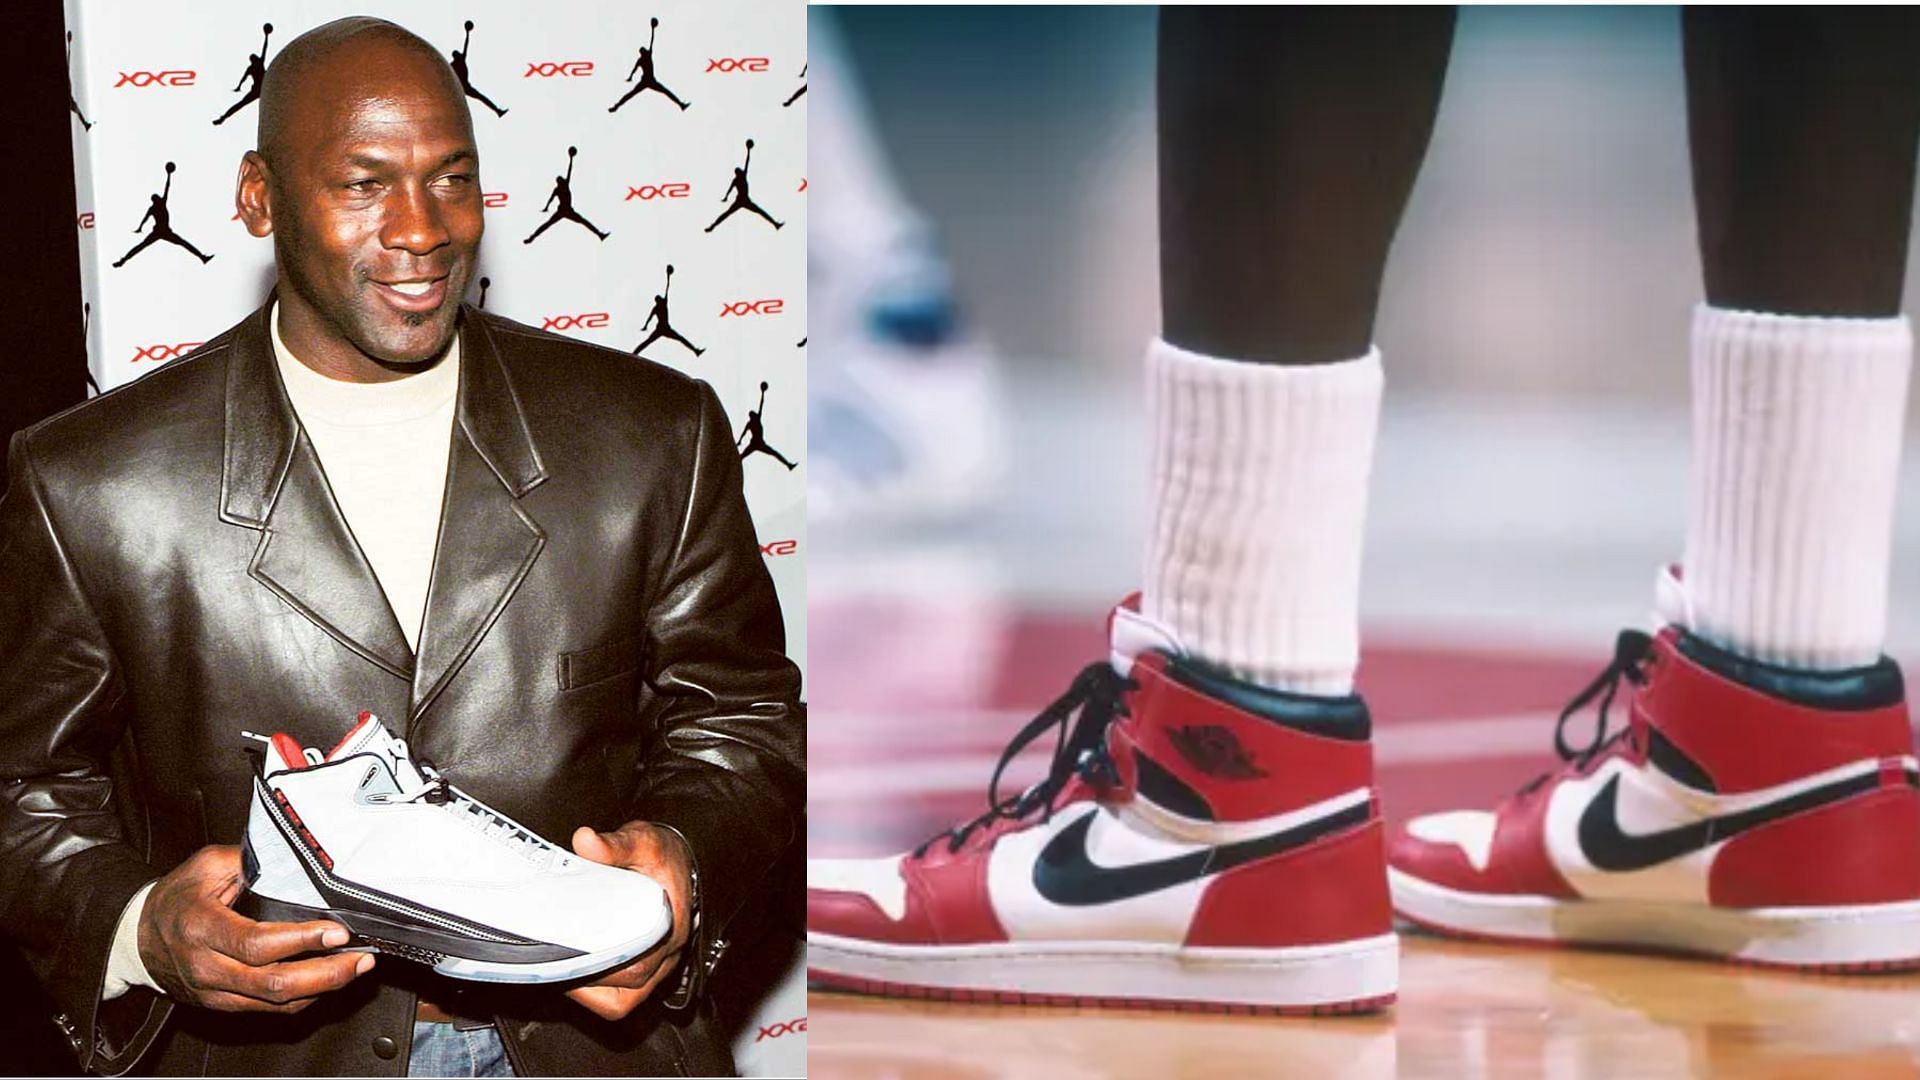 Viral article claims Michael Jordan ended his partnership with Nike following Dylan Mulvaney controversy. (Image via Wireimage, Getty Images)